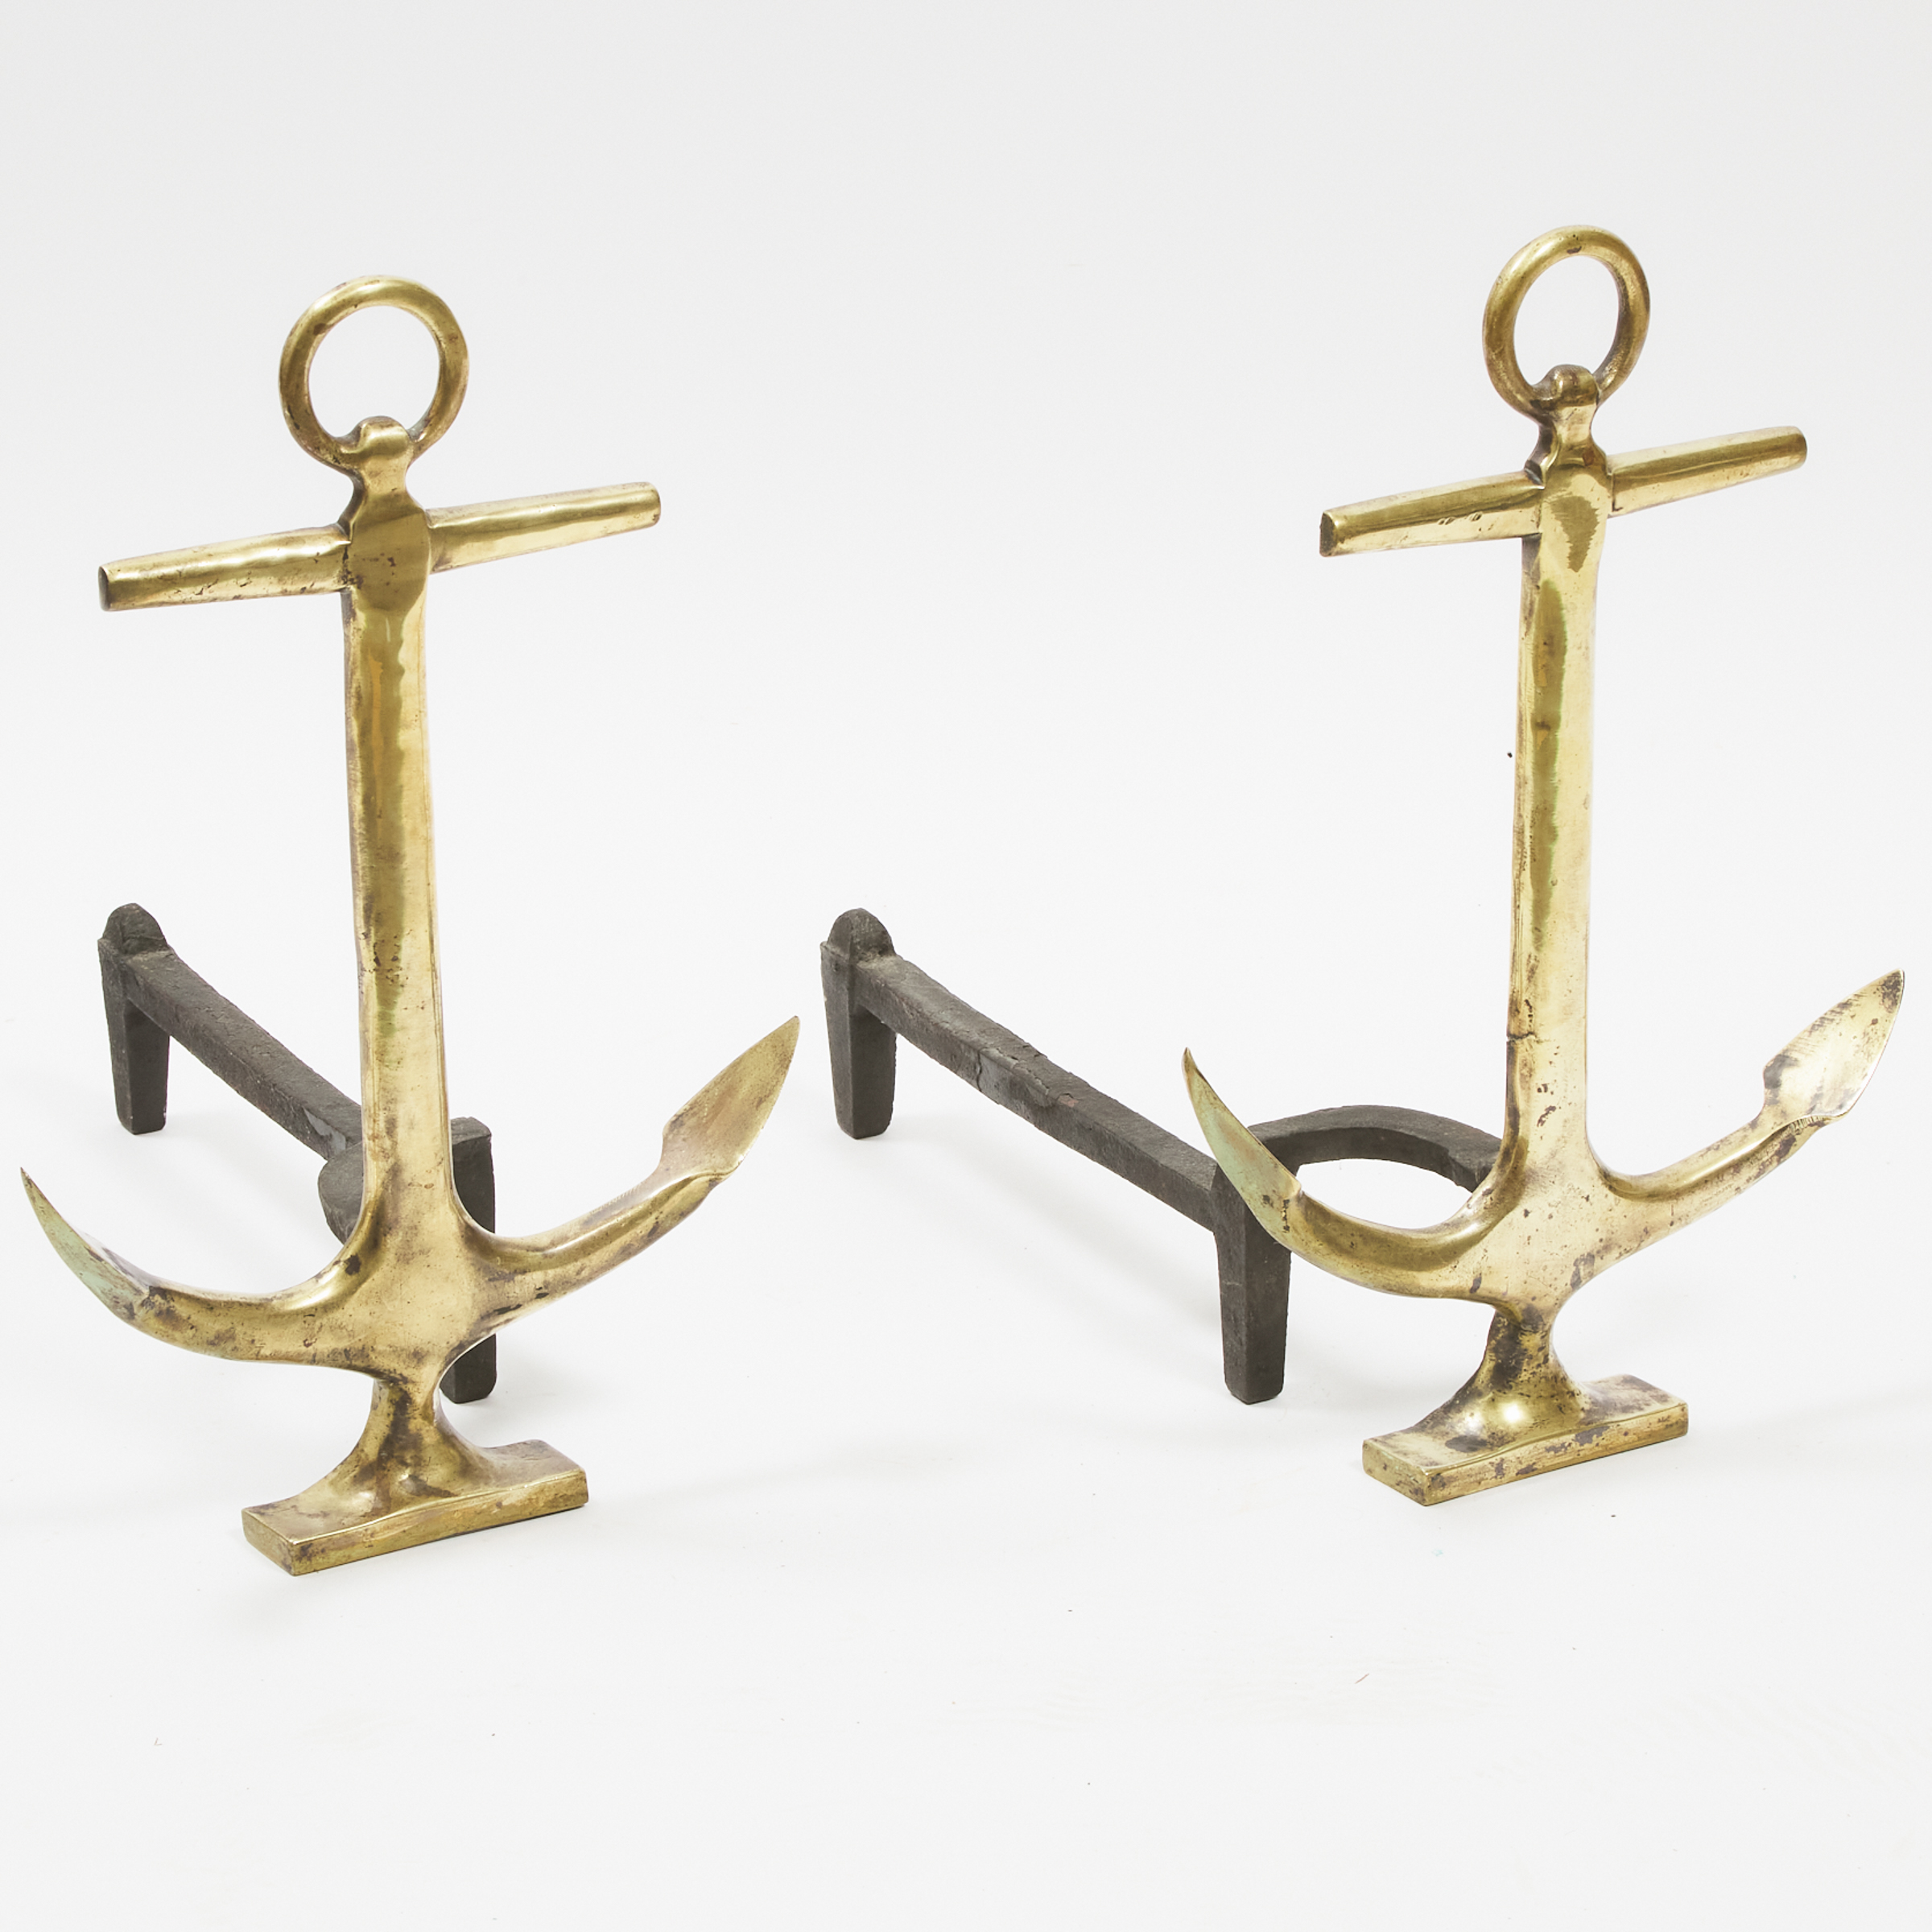 Pair of Brass Anchor Form Andirons, early-mid 20th century
